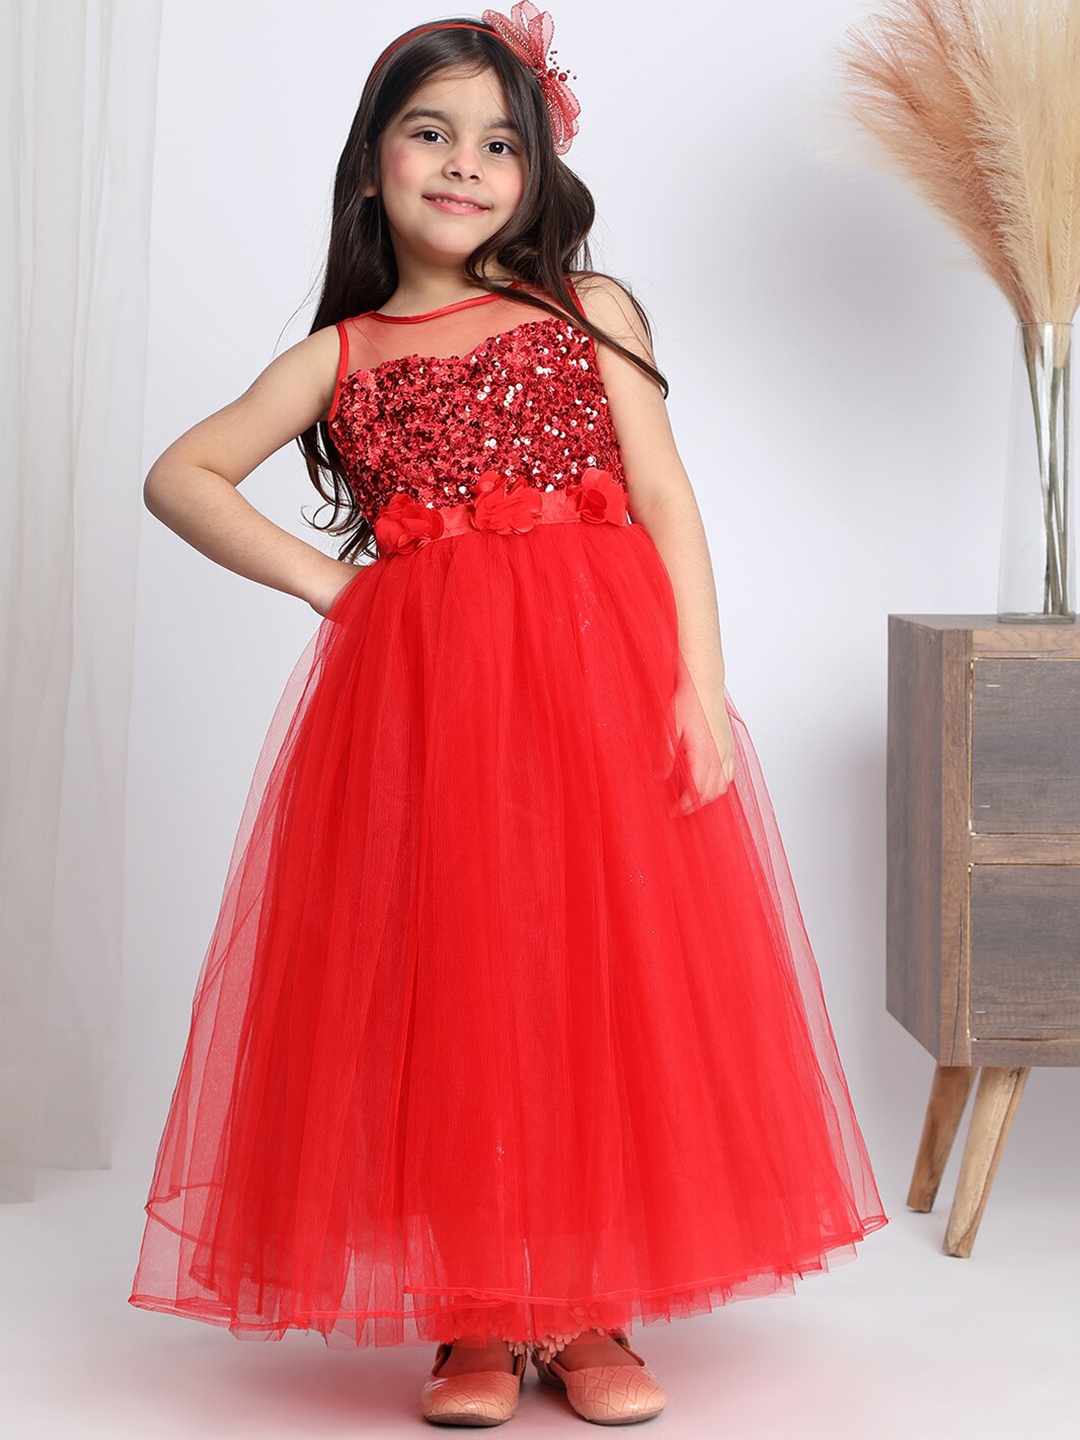 

Toy Balloon kids Girls Embellished Net Fit & Flare Dress, Red